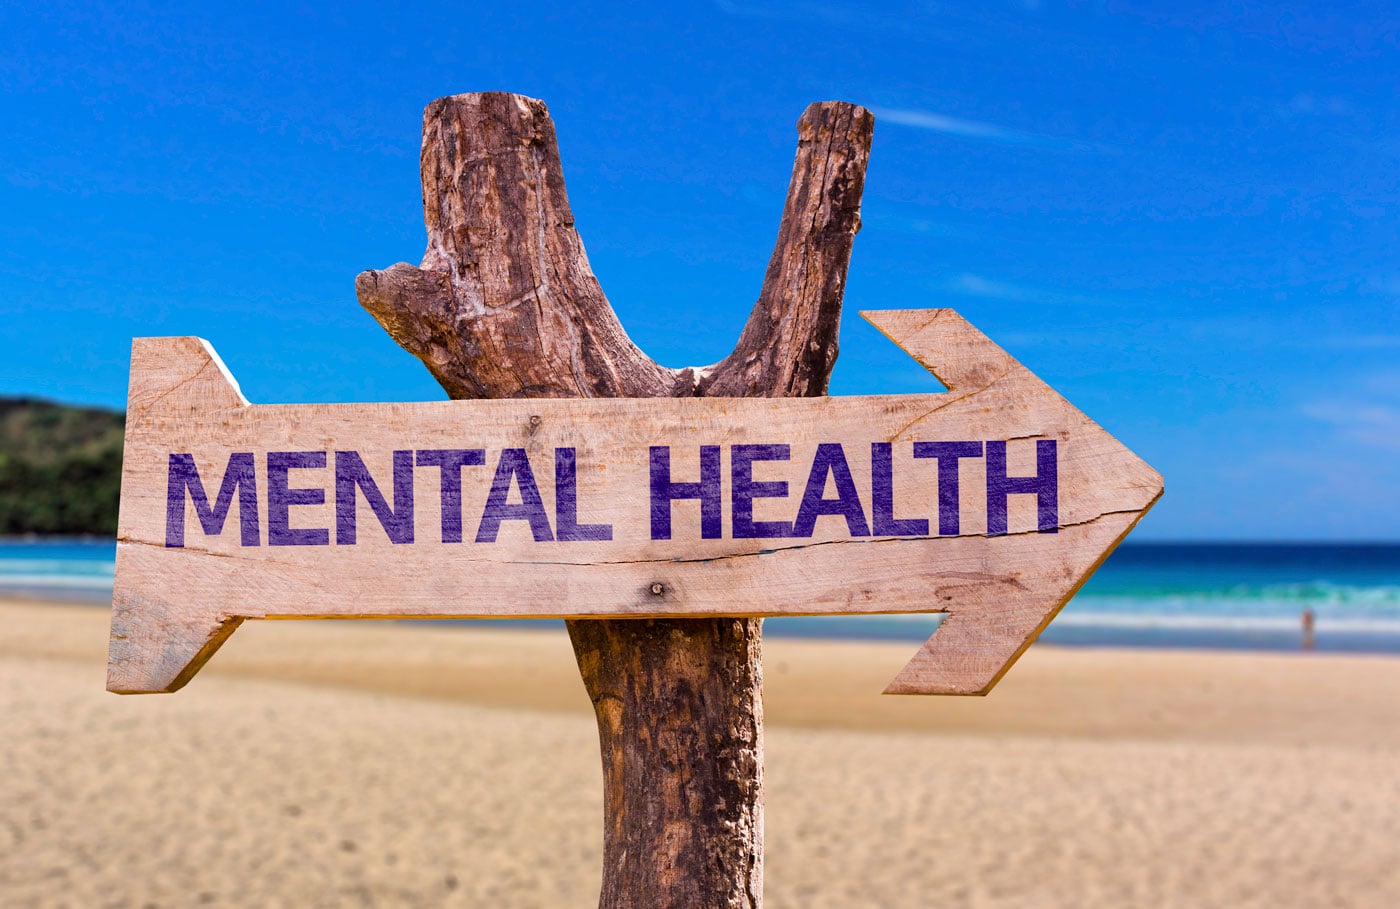 A wooden sign pointing to mental health on the beach.